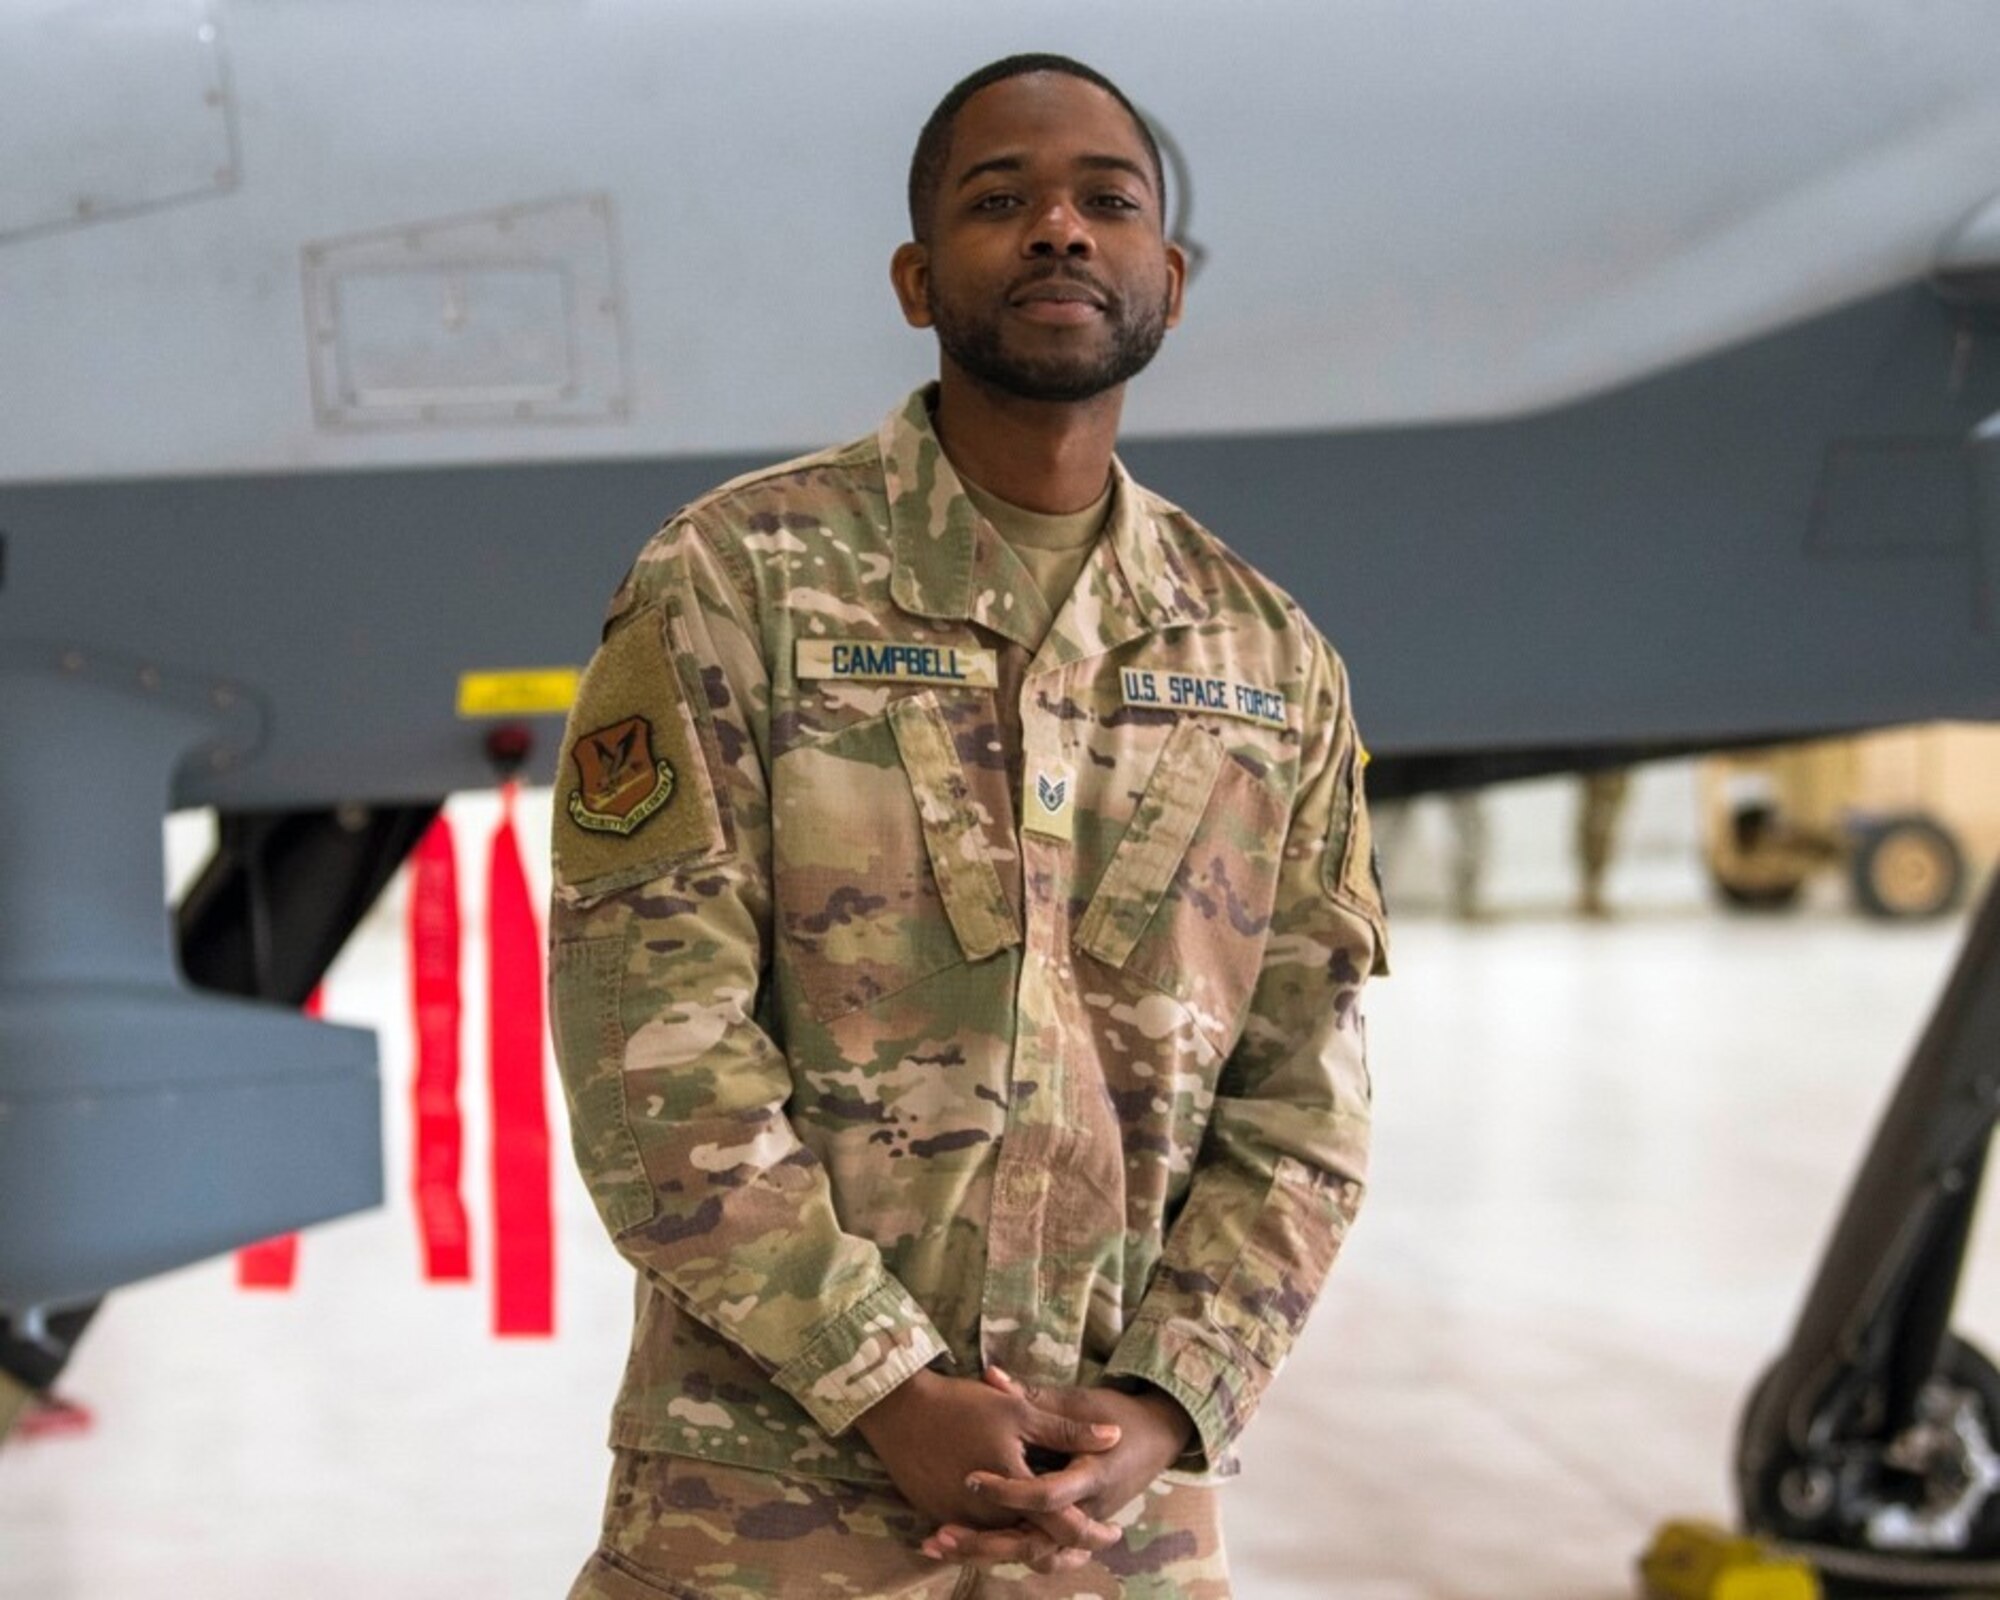 U.S. Space Force Sgt. Keontae Campbell, 49th Aircraft Maintenance Squadron, poses for a photo Feb 12, 2021, on Holloman Air Force Base, New Mexico. The USSF is currently working on transferring over 6,000 Airmen from the Air Force to the Space Force by mid-2021. In Sept. 2020, the Air Force transitioned more than 2,400 active-duty Airmen in space operations and space system operations to begin establishing, maintaining, and preserving U.S. freedom of operations in space. (U.S. Air Force photo by Airman 1st Class Jessica Sanchez)